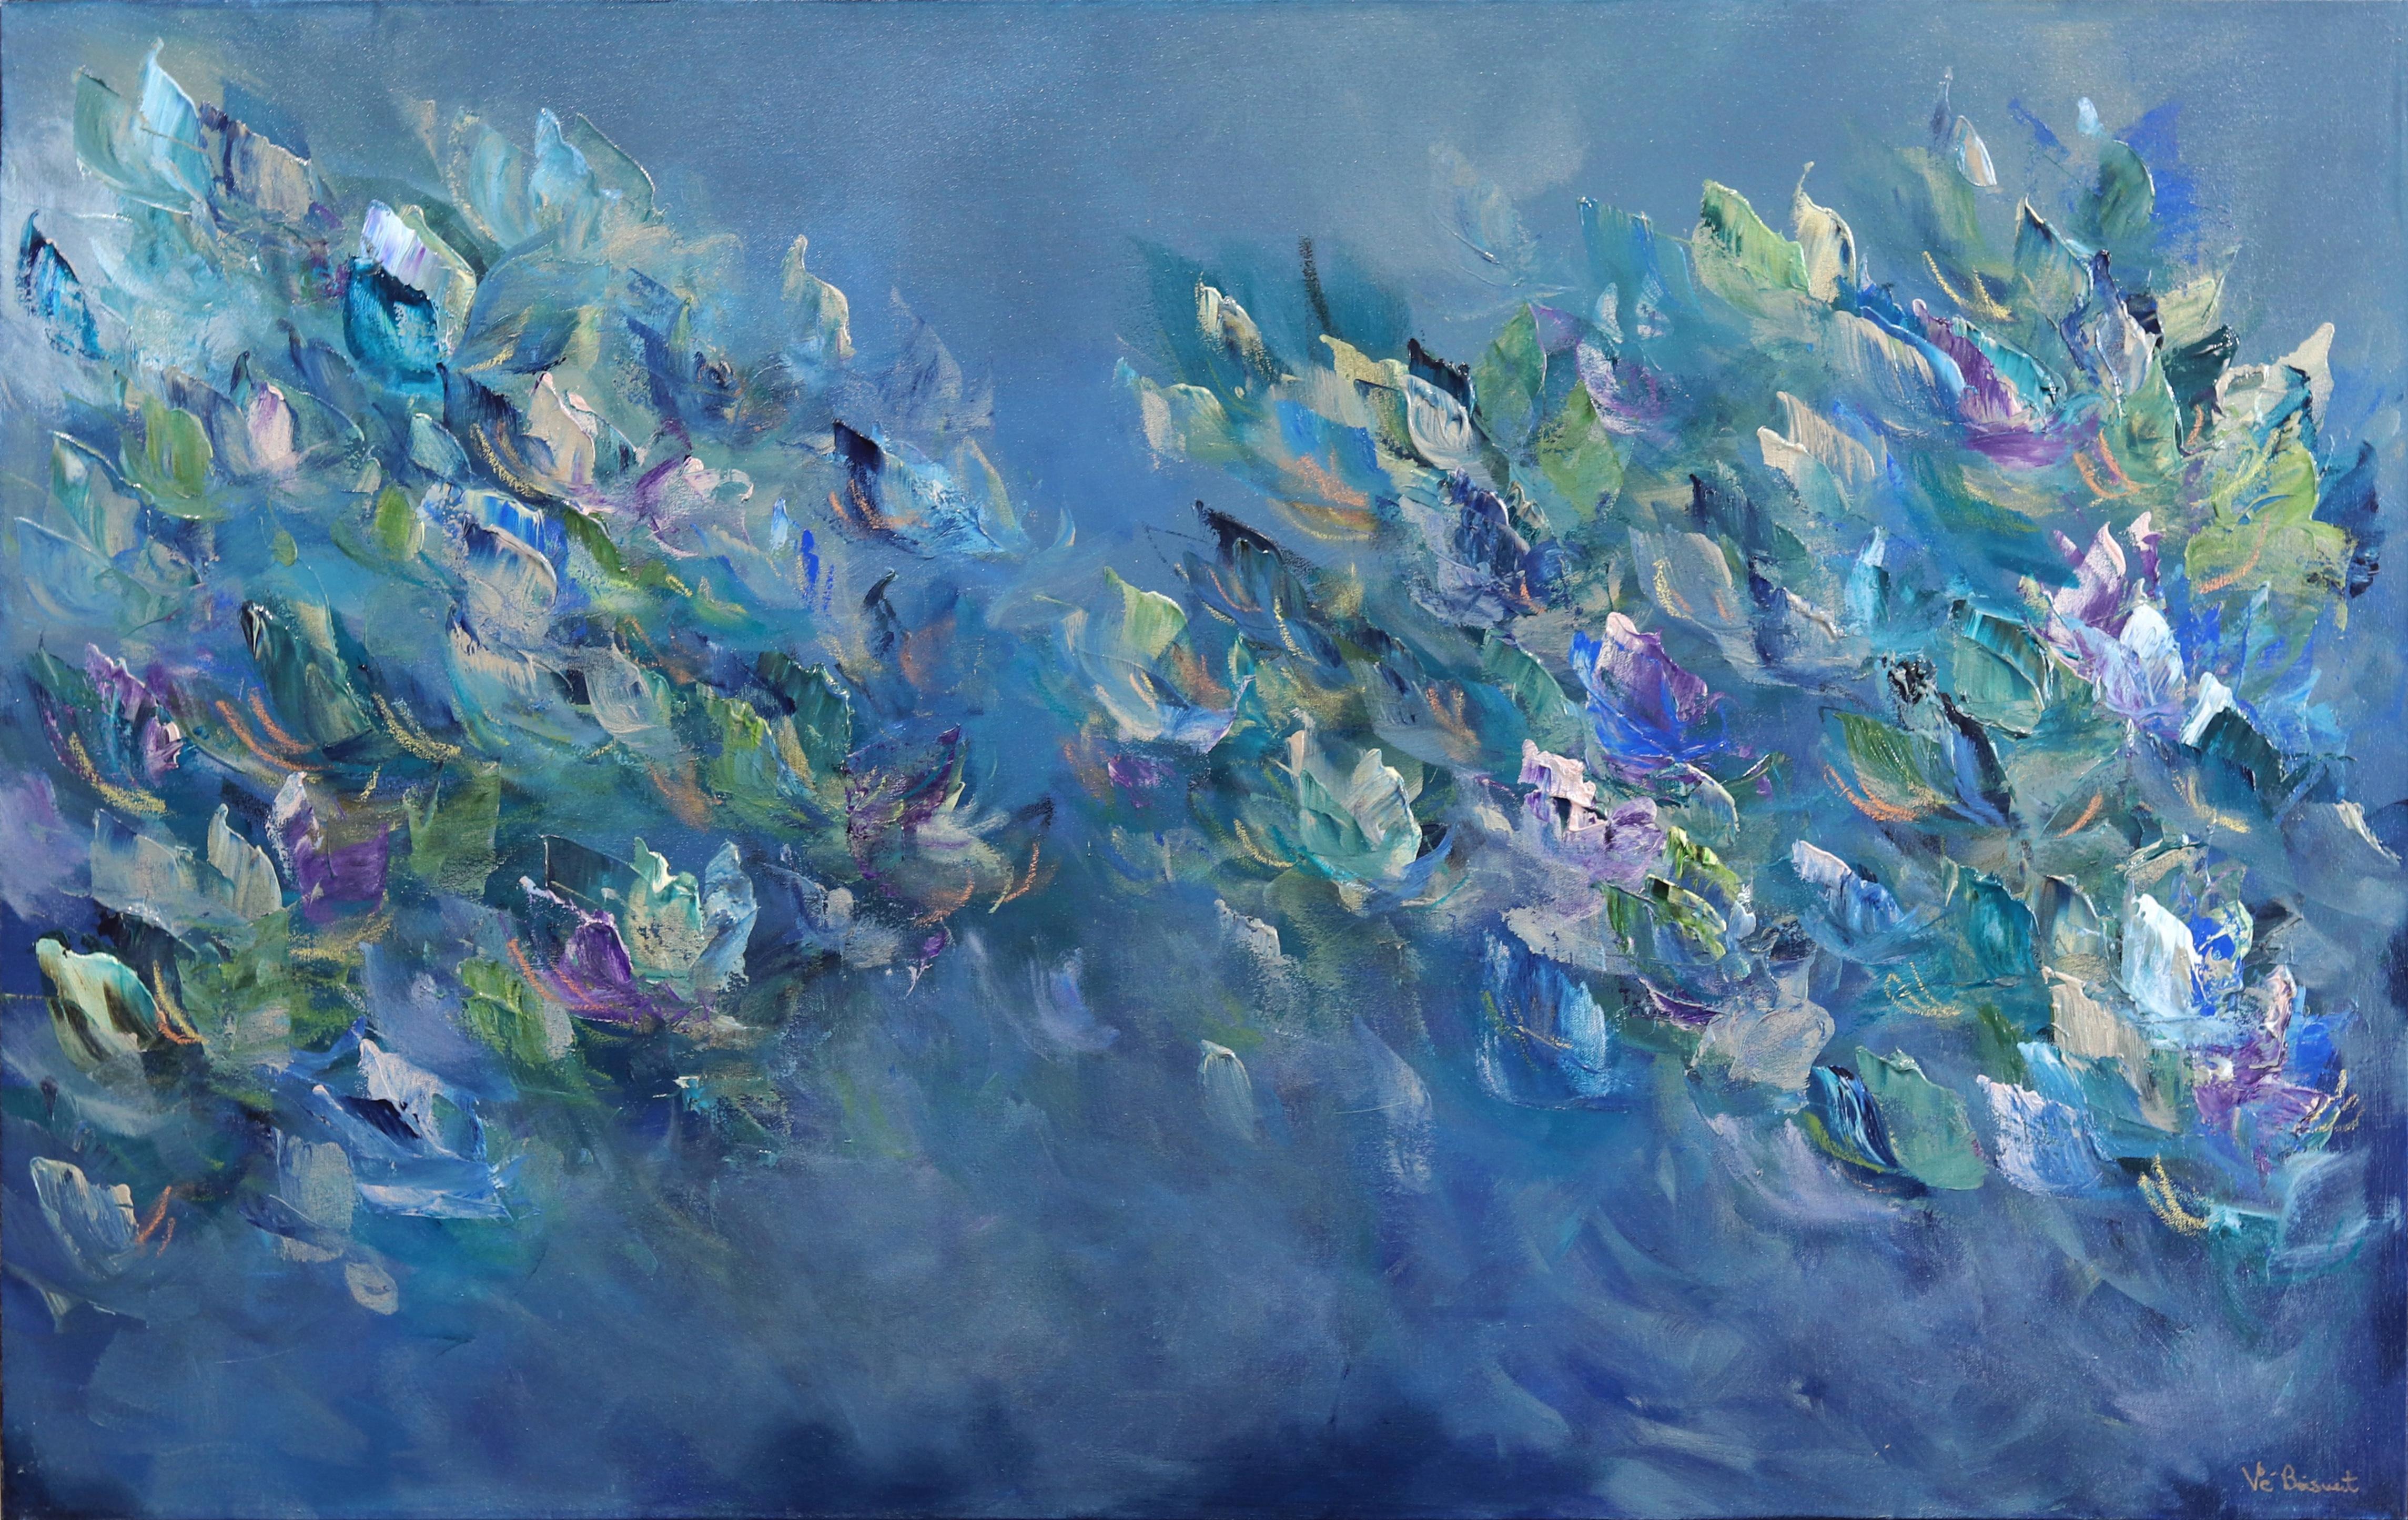 Vè Boisvert Landscape Painting - Beauty of the Sea - Blue Abstract Floral Painting